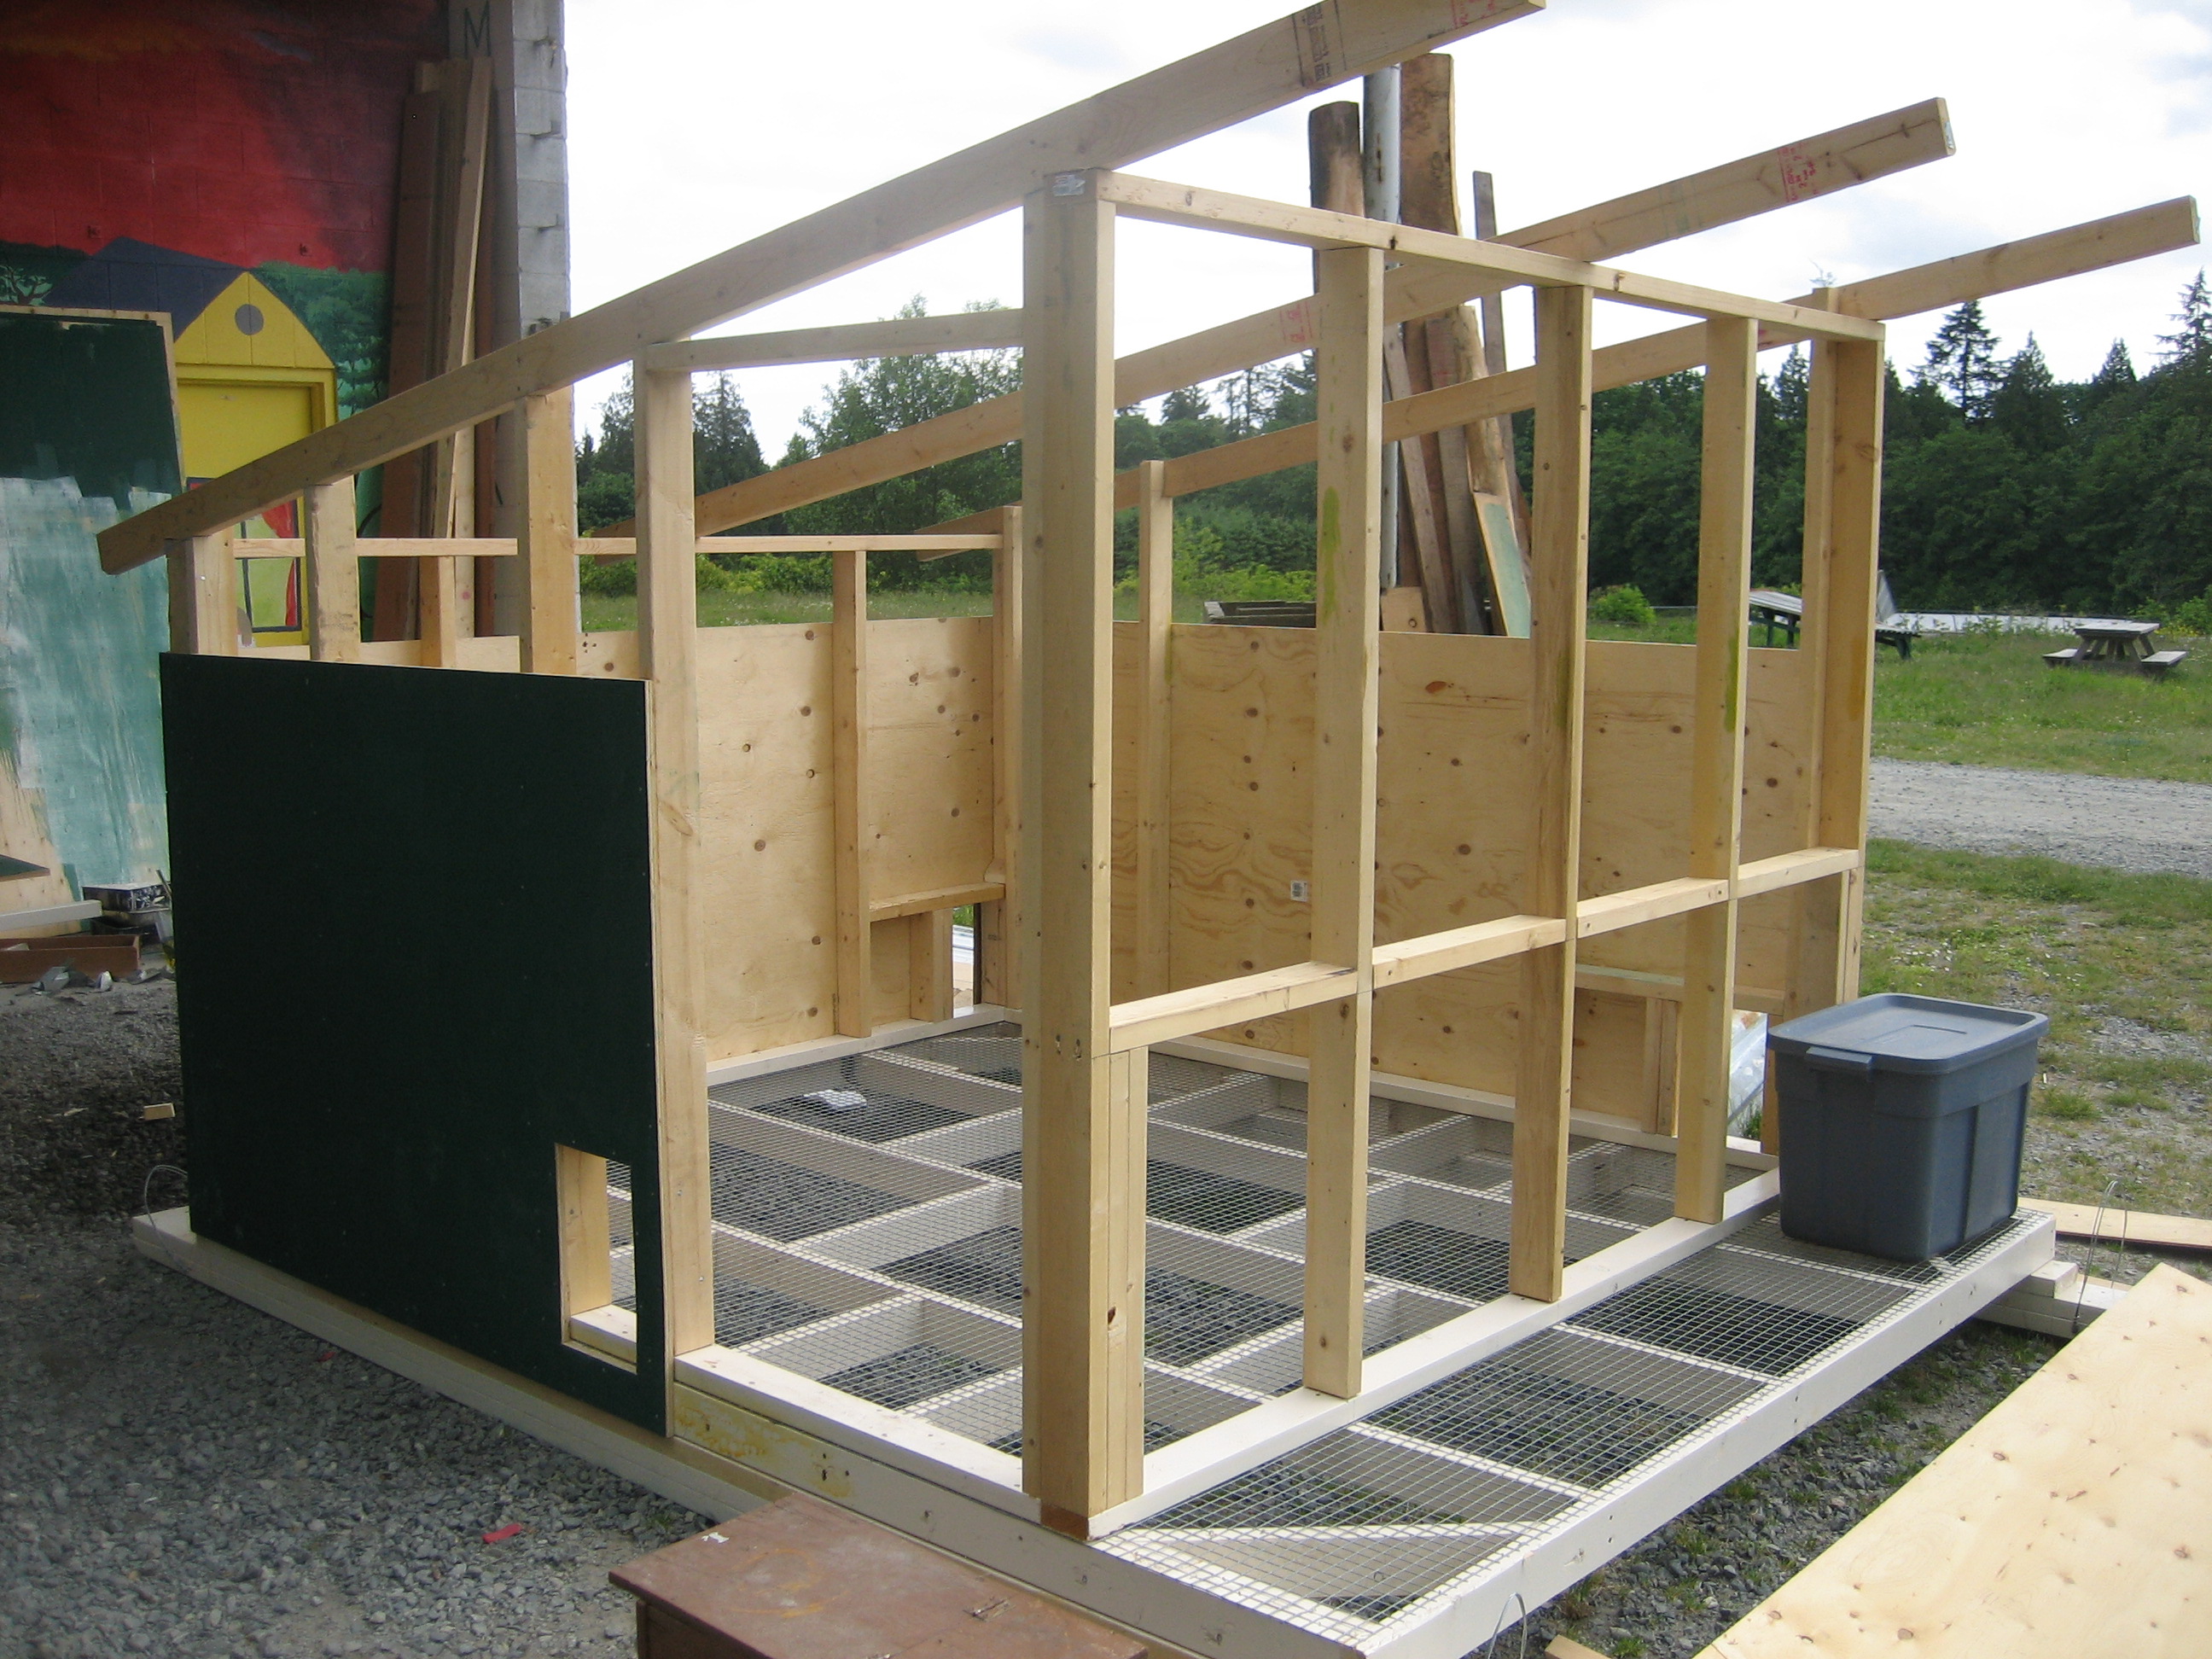 Construction plans for a Chicken Coop New and Clever 